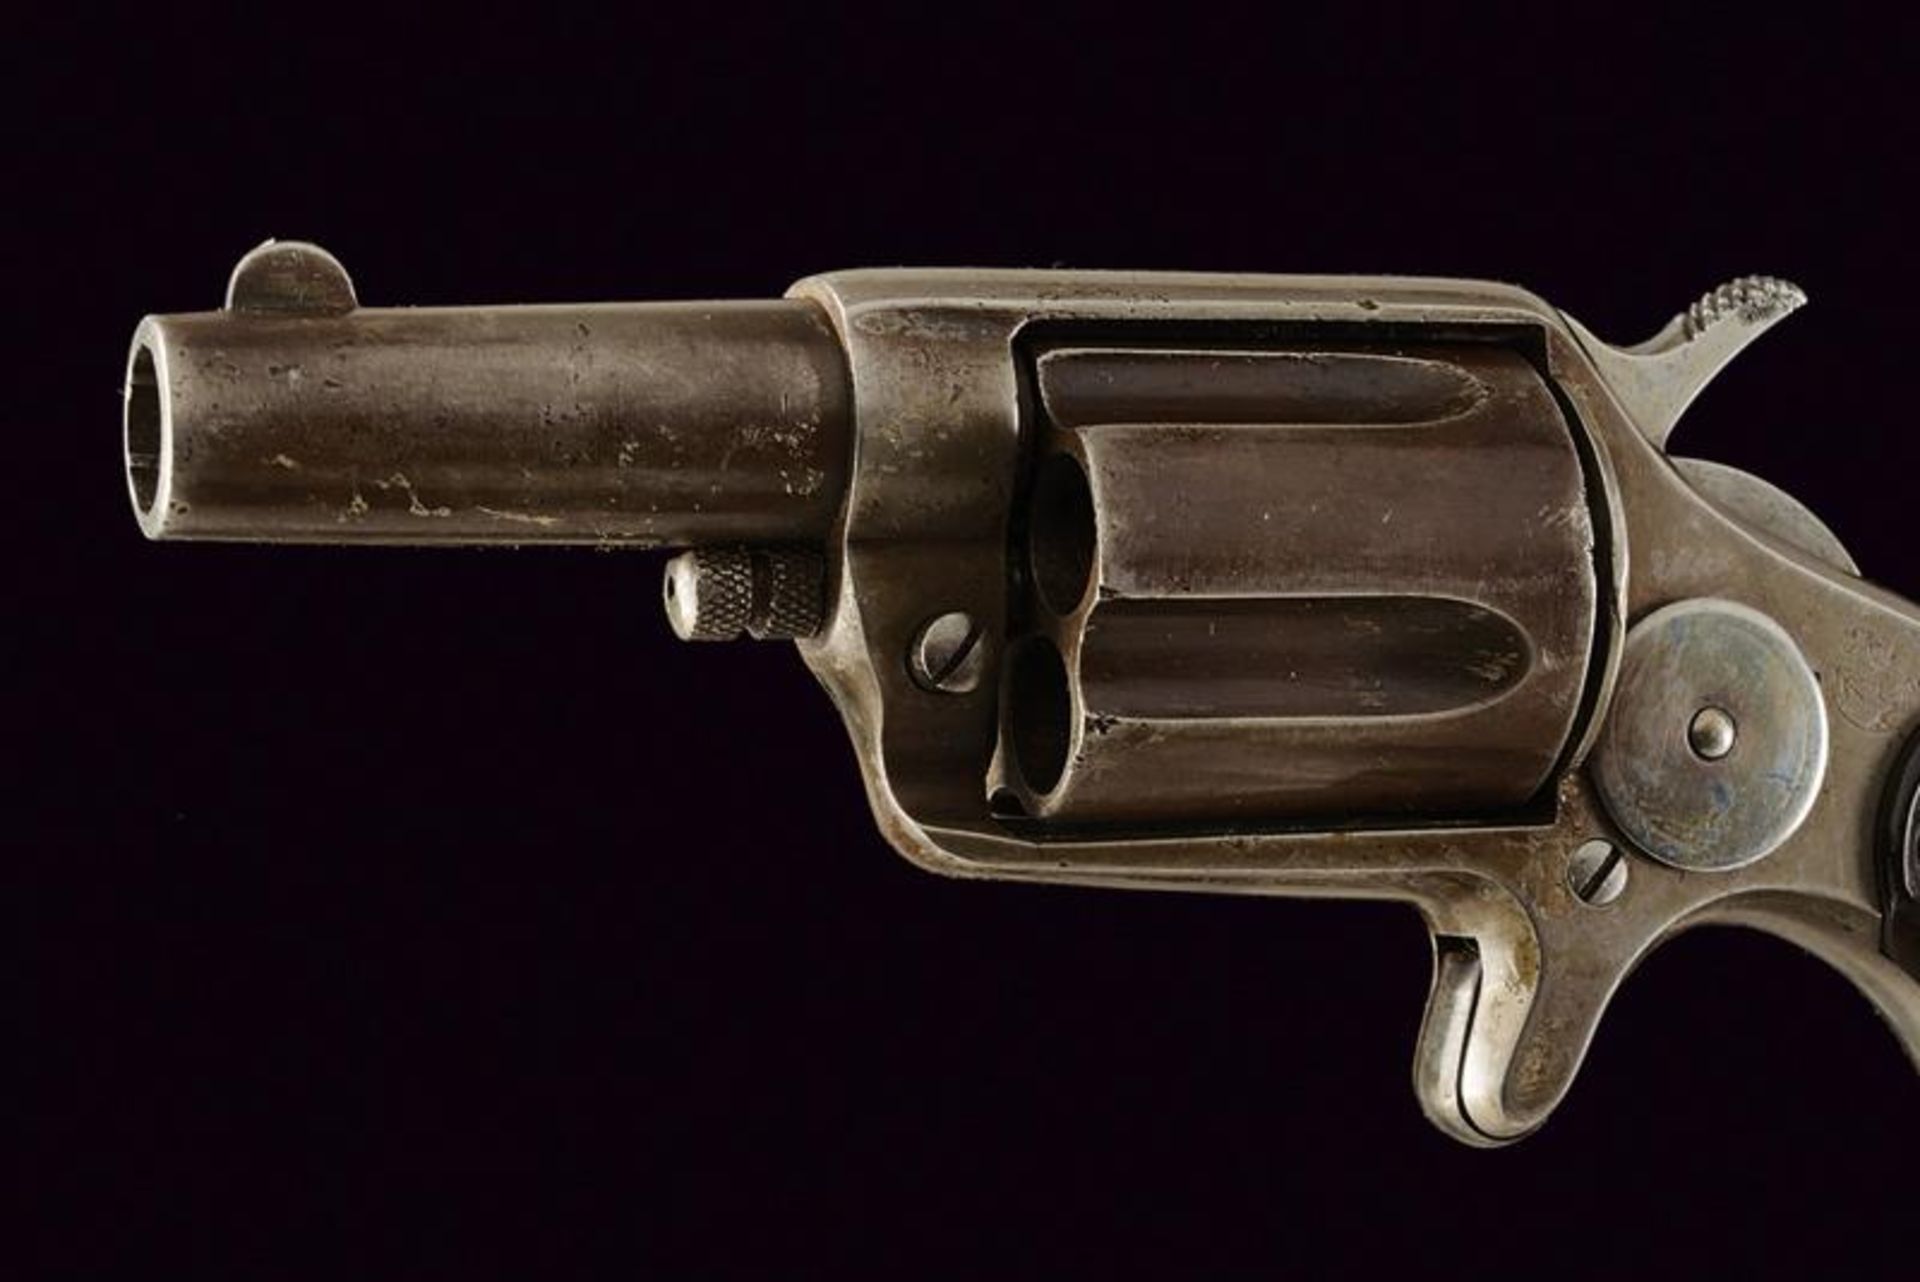 A Colt New House Model Revolver - Image 2 of 3